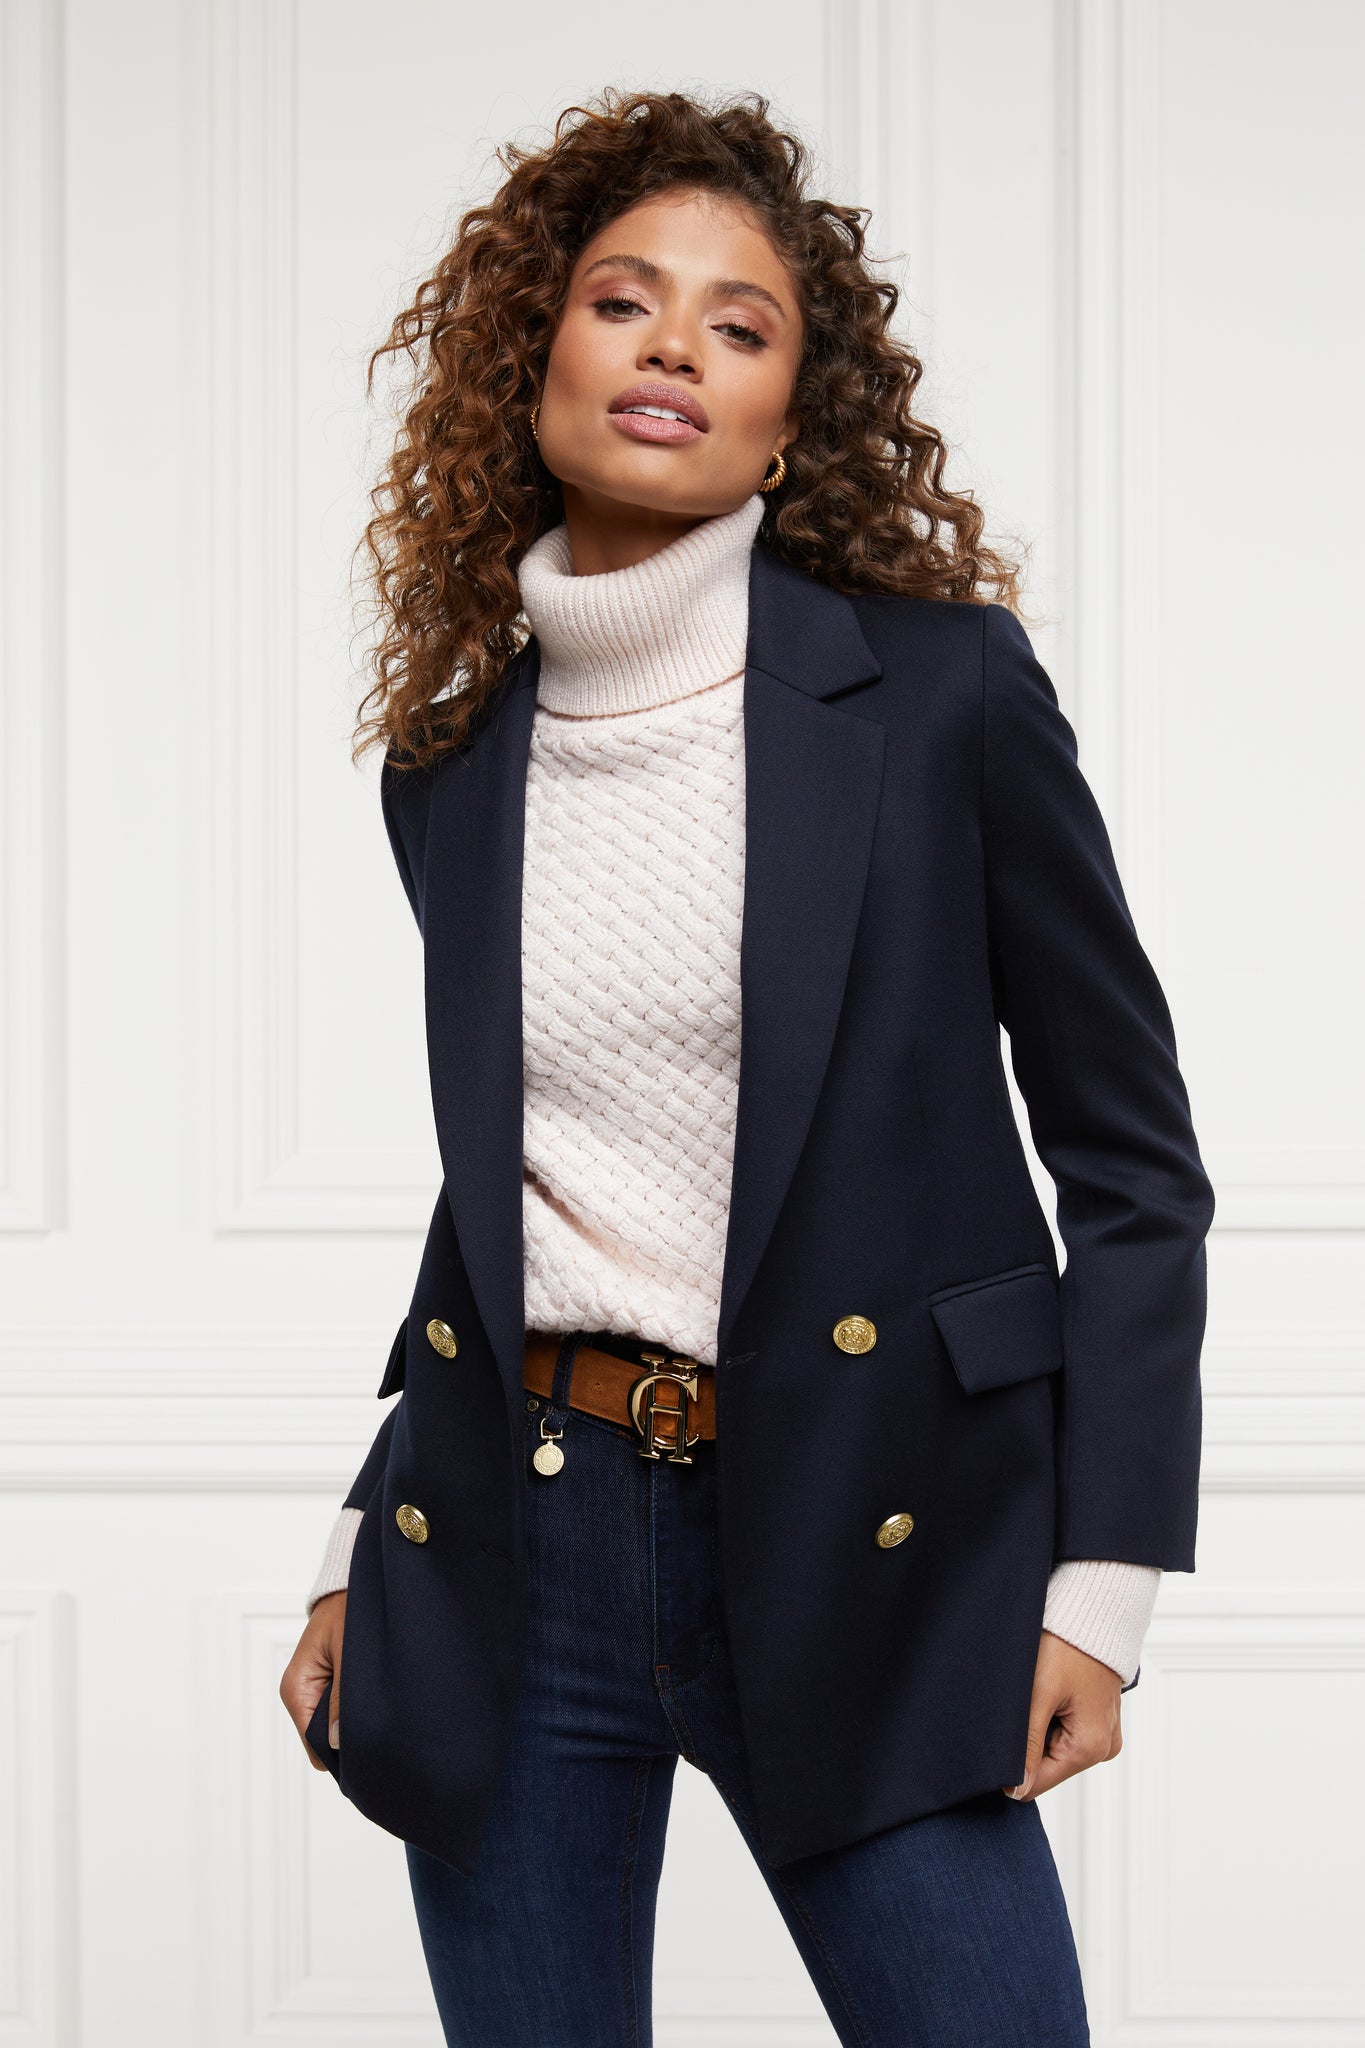 womens lightweight roll neck basket weave knit jumper in powder pink layered under a double breasted blazer in navy